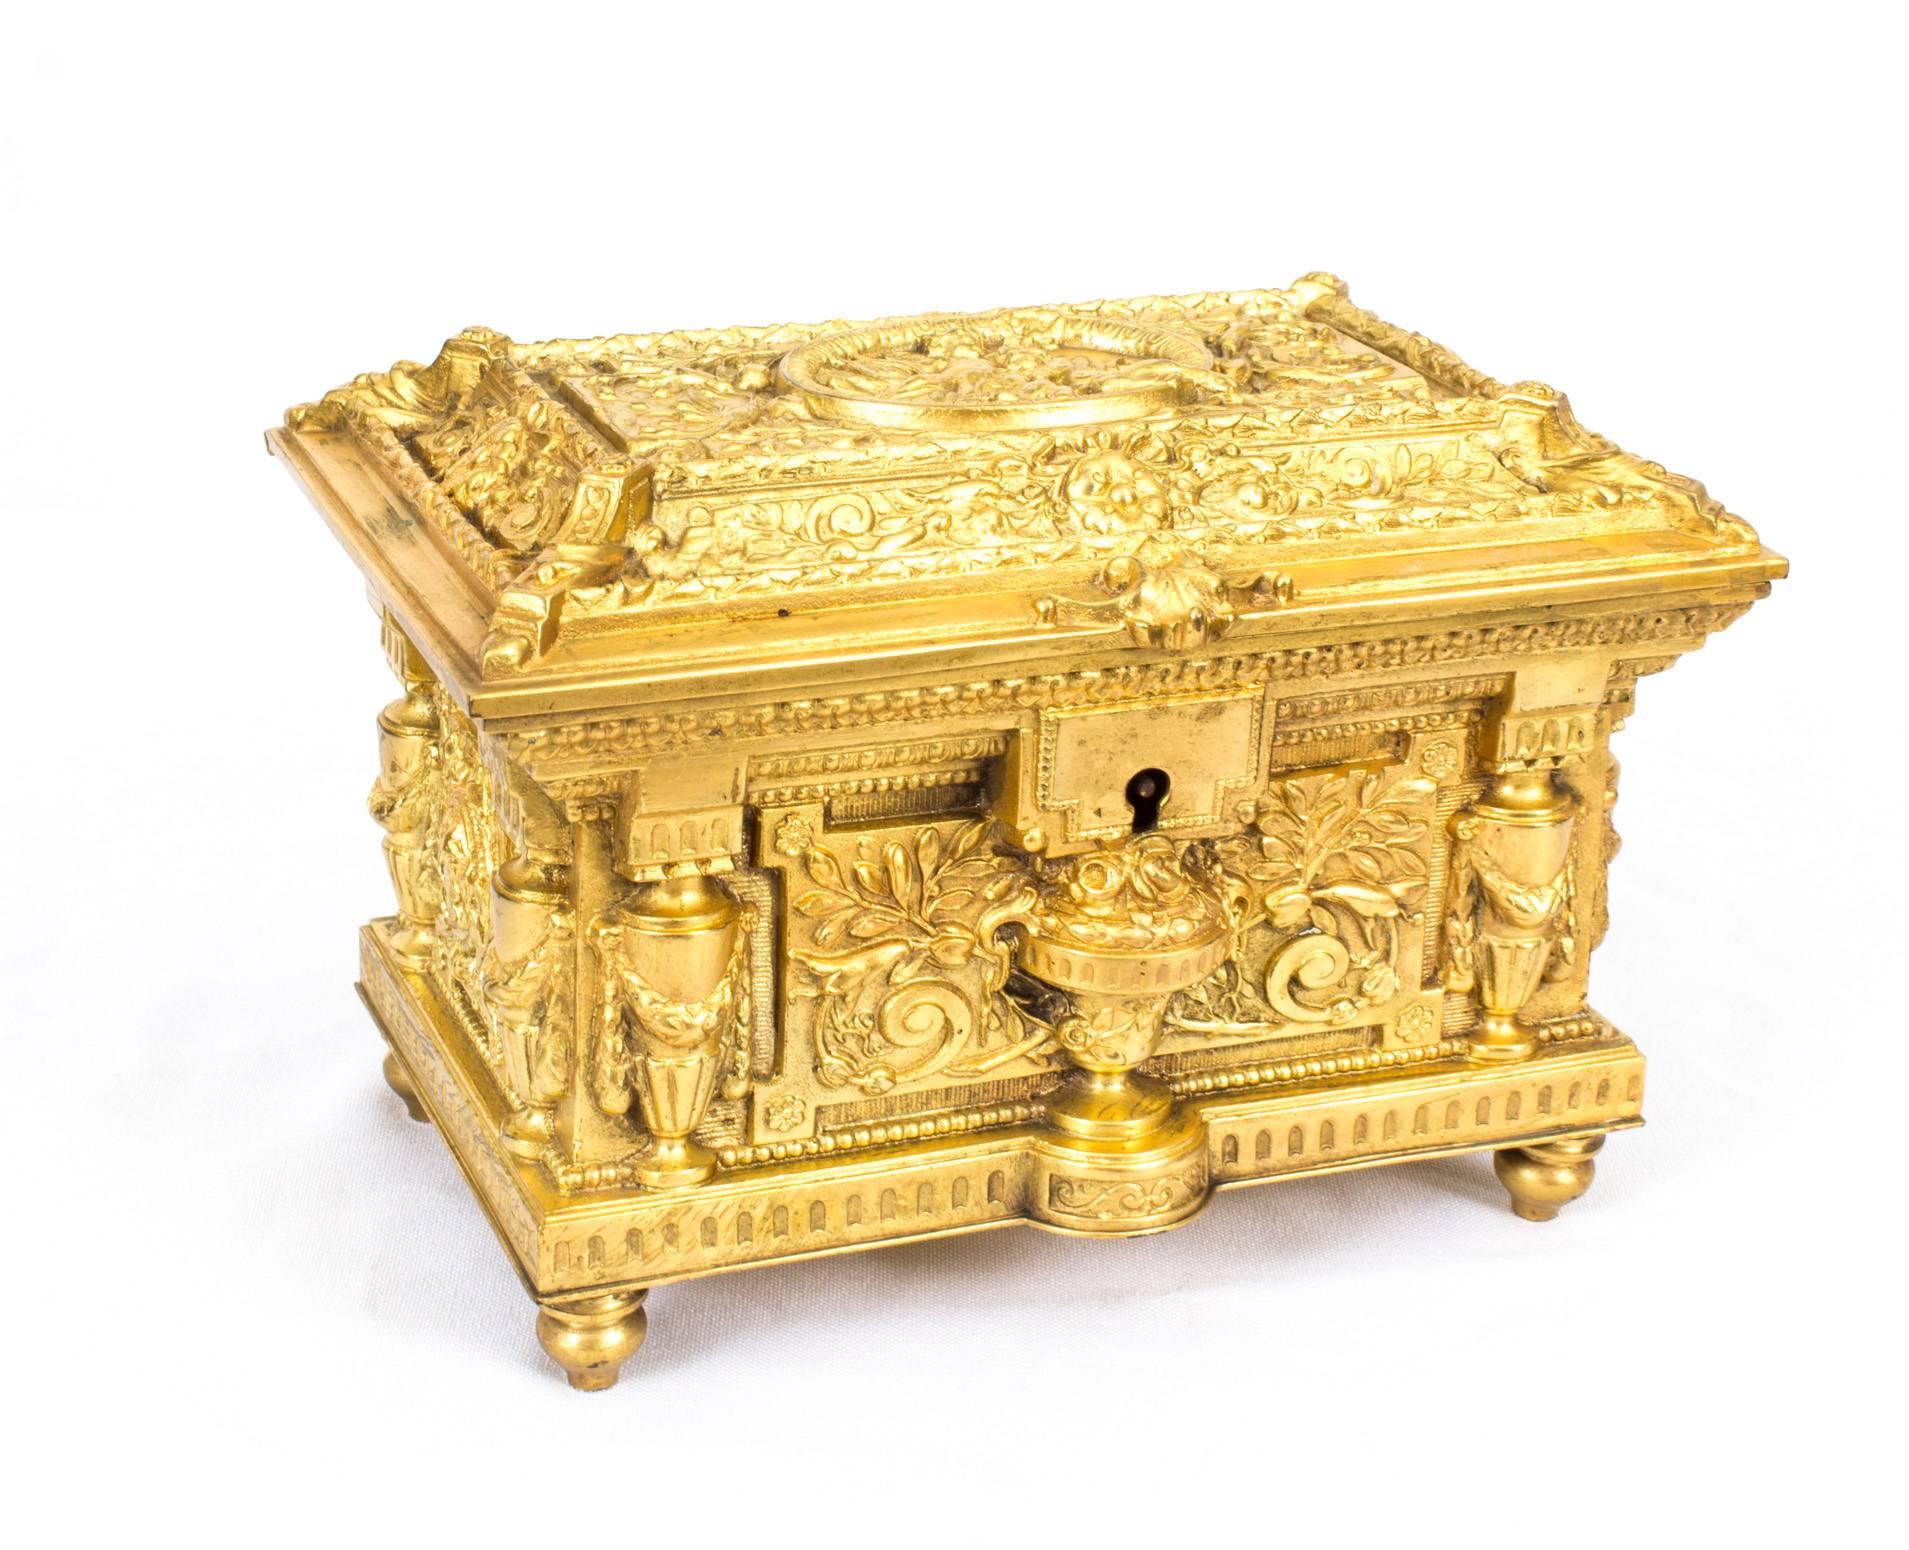 This is a beautiful antique French Renaissance Revival gilded ormolu Palais Royale jewellery casket, circa 1870 in date.

The top, front, sides and back are beautifully cast in gilt bronze with bows, ribbons, garlands, urns and cherubs and it